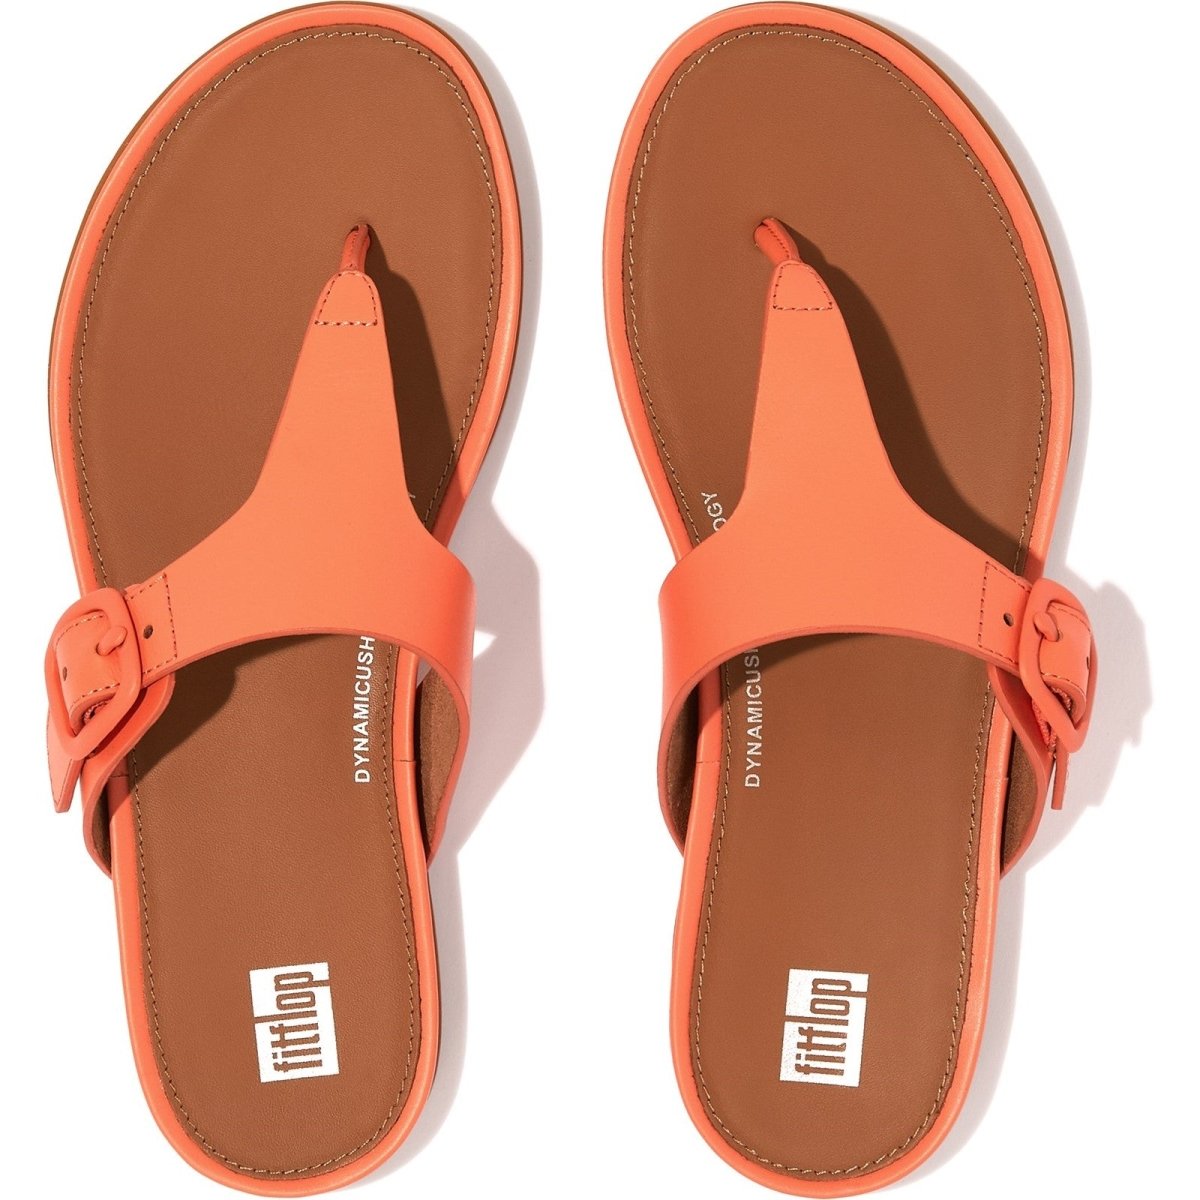 Fitflop Gracie Ladies Leather Summer Toe-Post Sandals - Shoe Store Direct